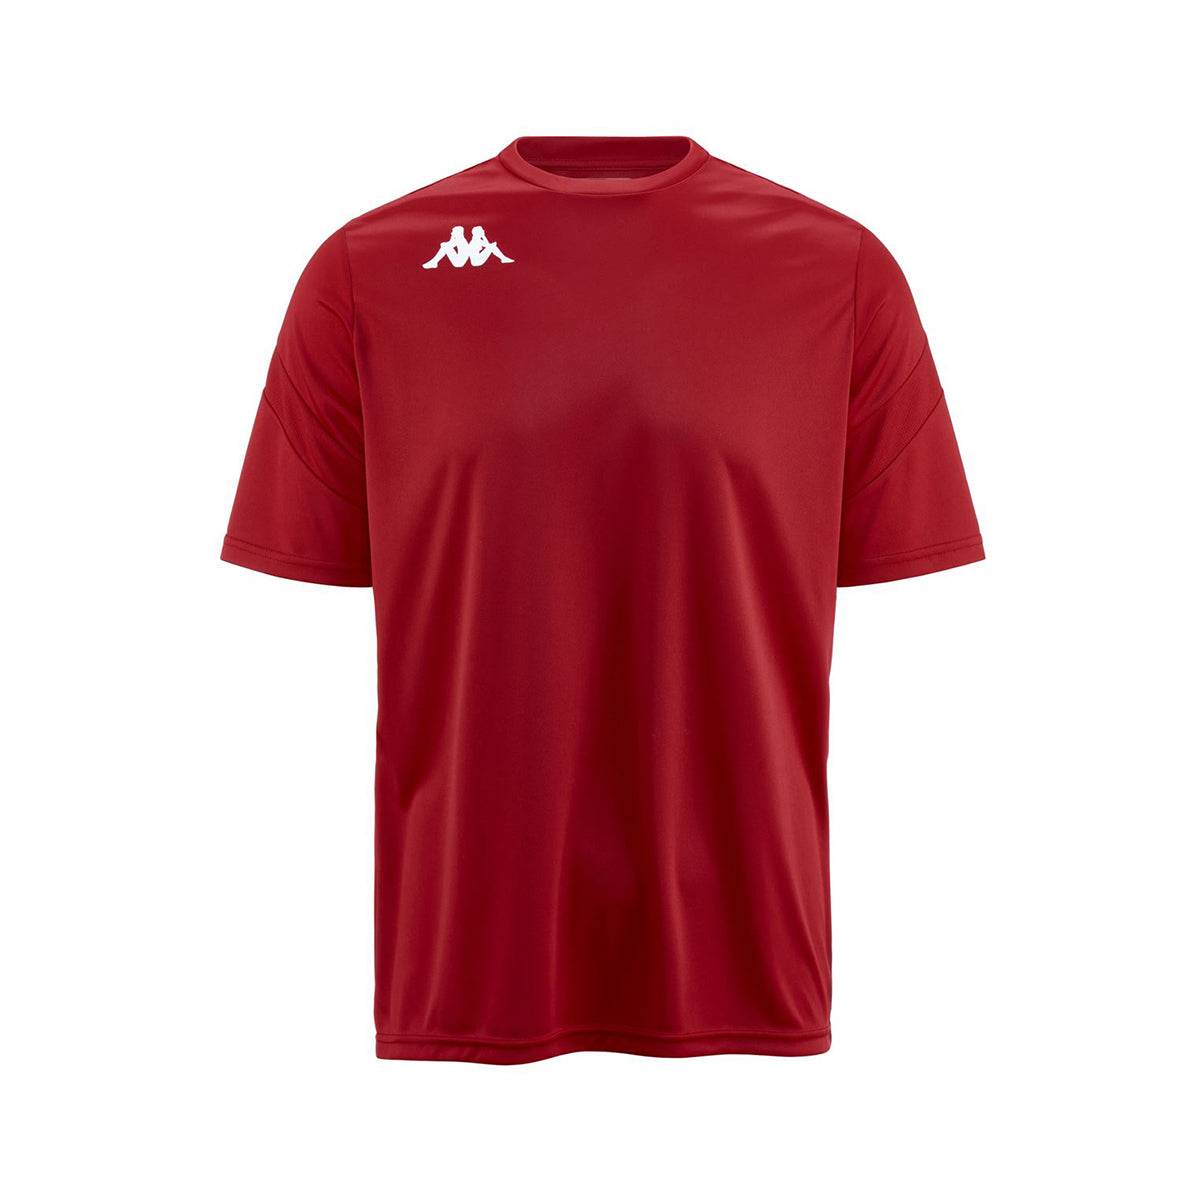 Maillot Dovo Rouge Homme - Image 1